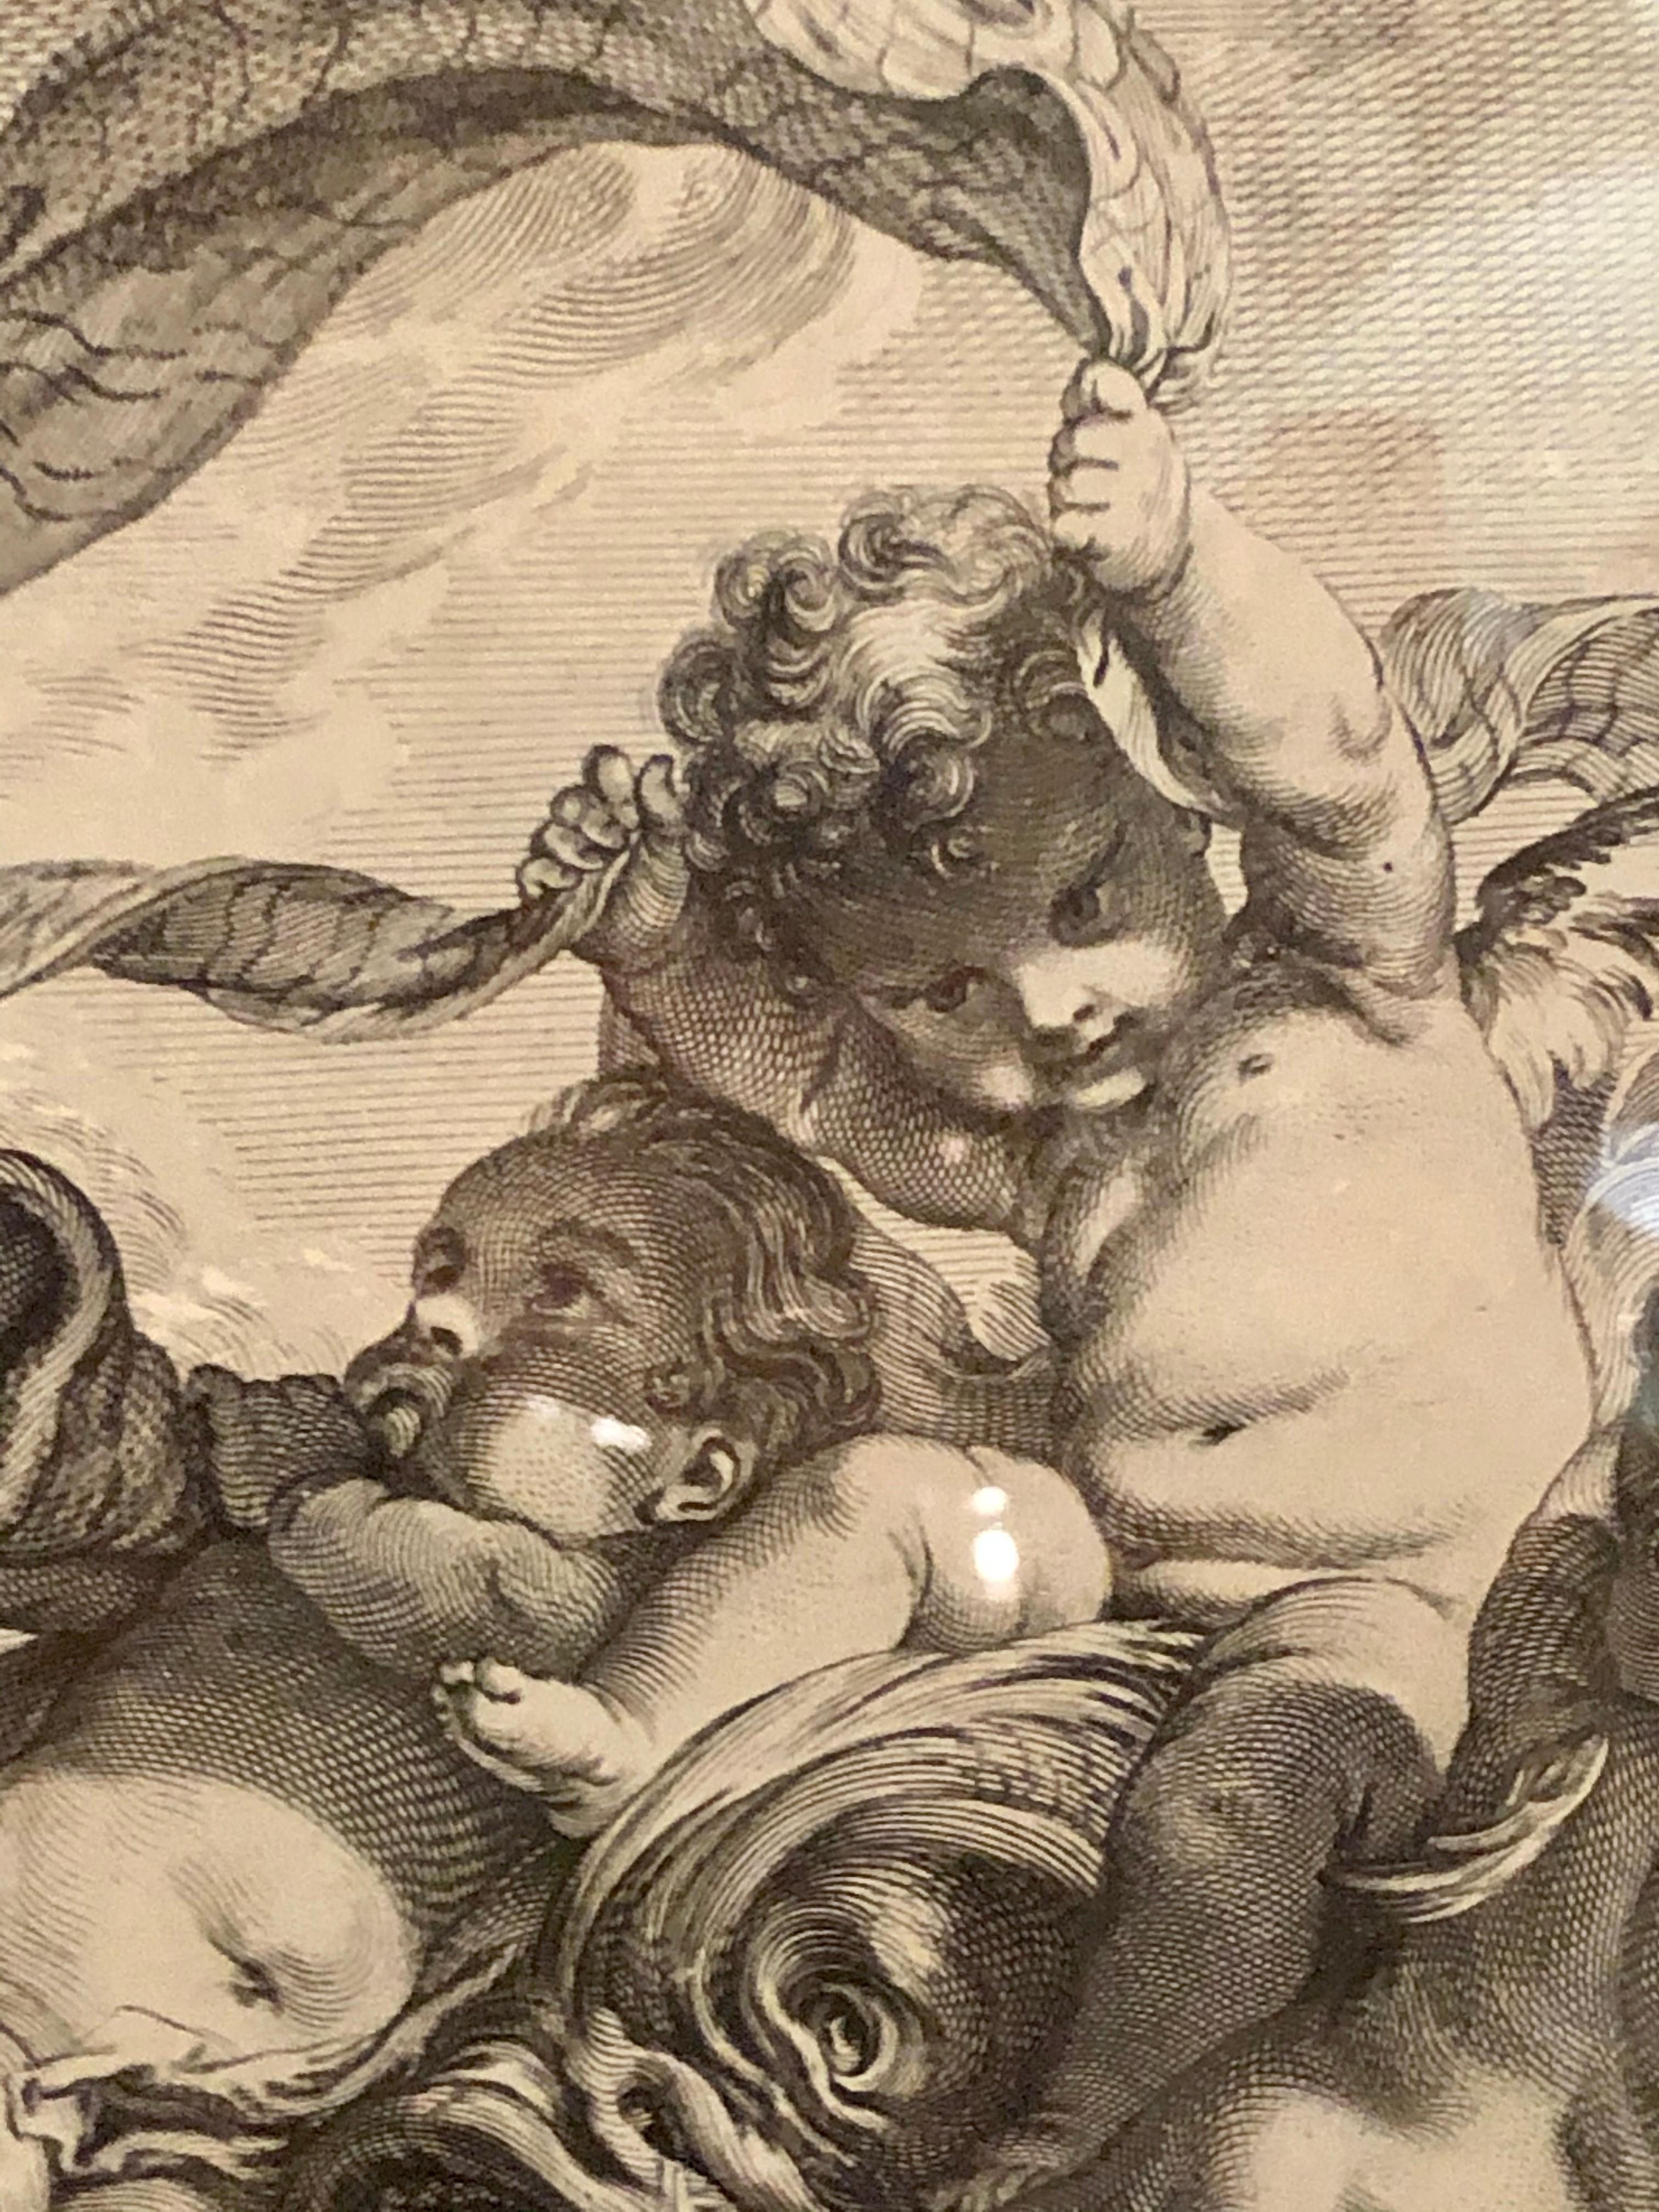 Four Framed Elements “Putti” Etchings after François Boucher’s 3